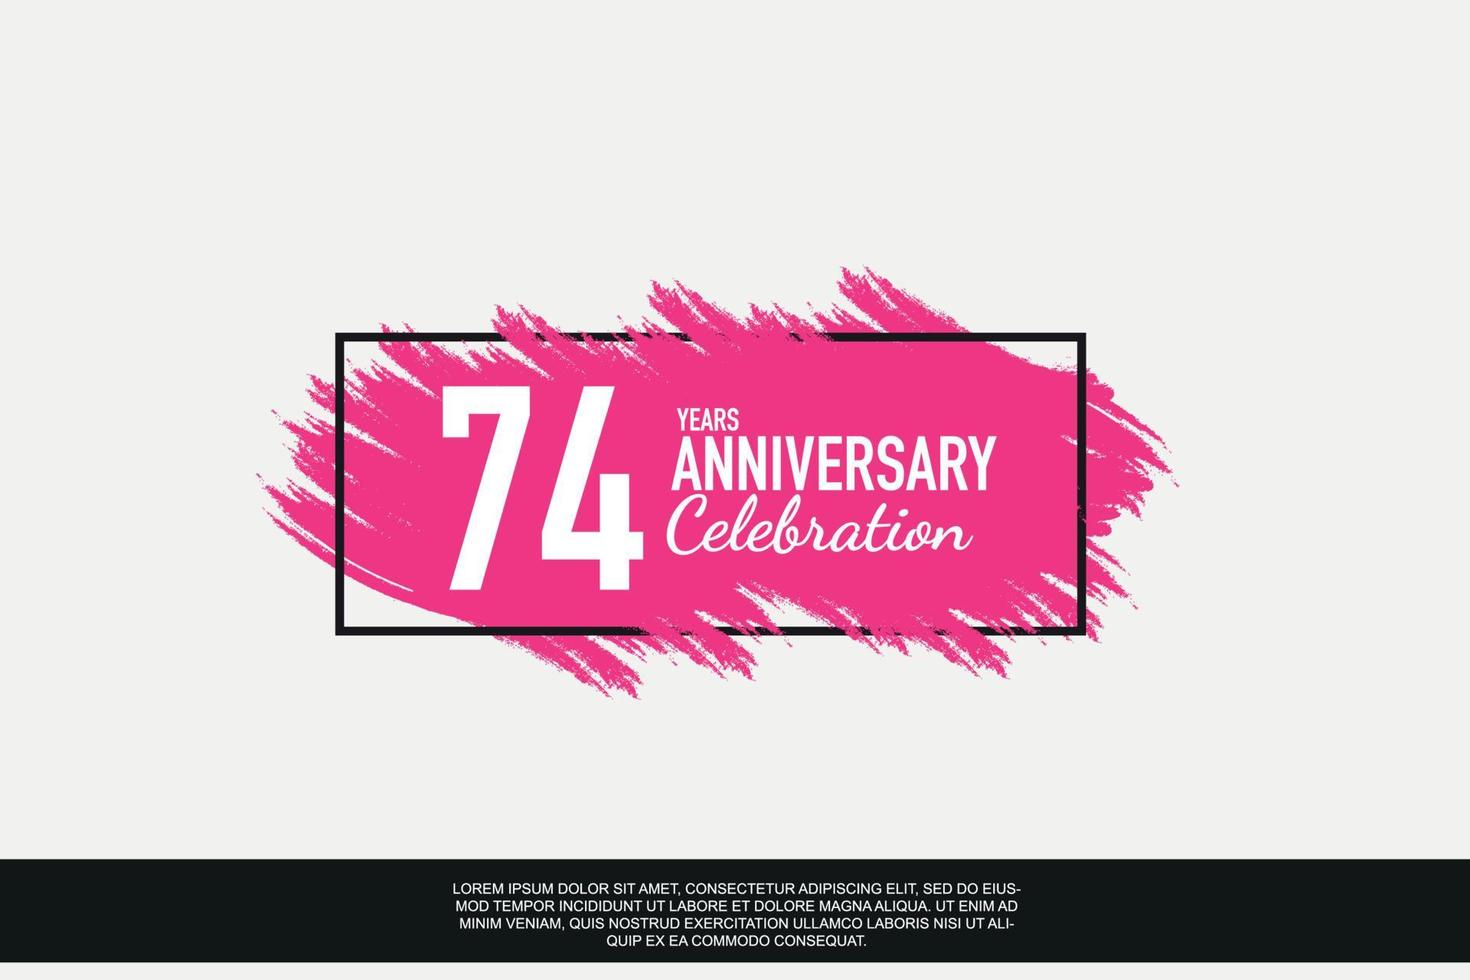 74 year anniversary celebration vector pink design in black frame on white background abstract illustration logo